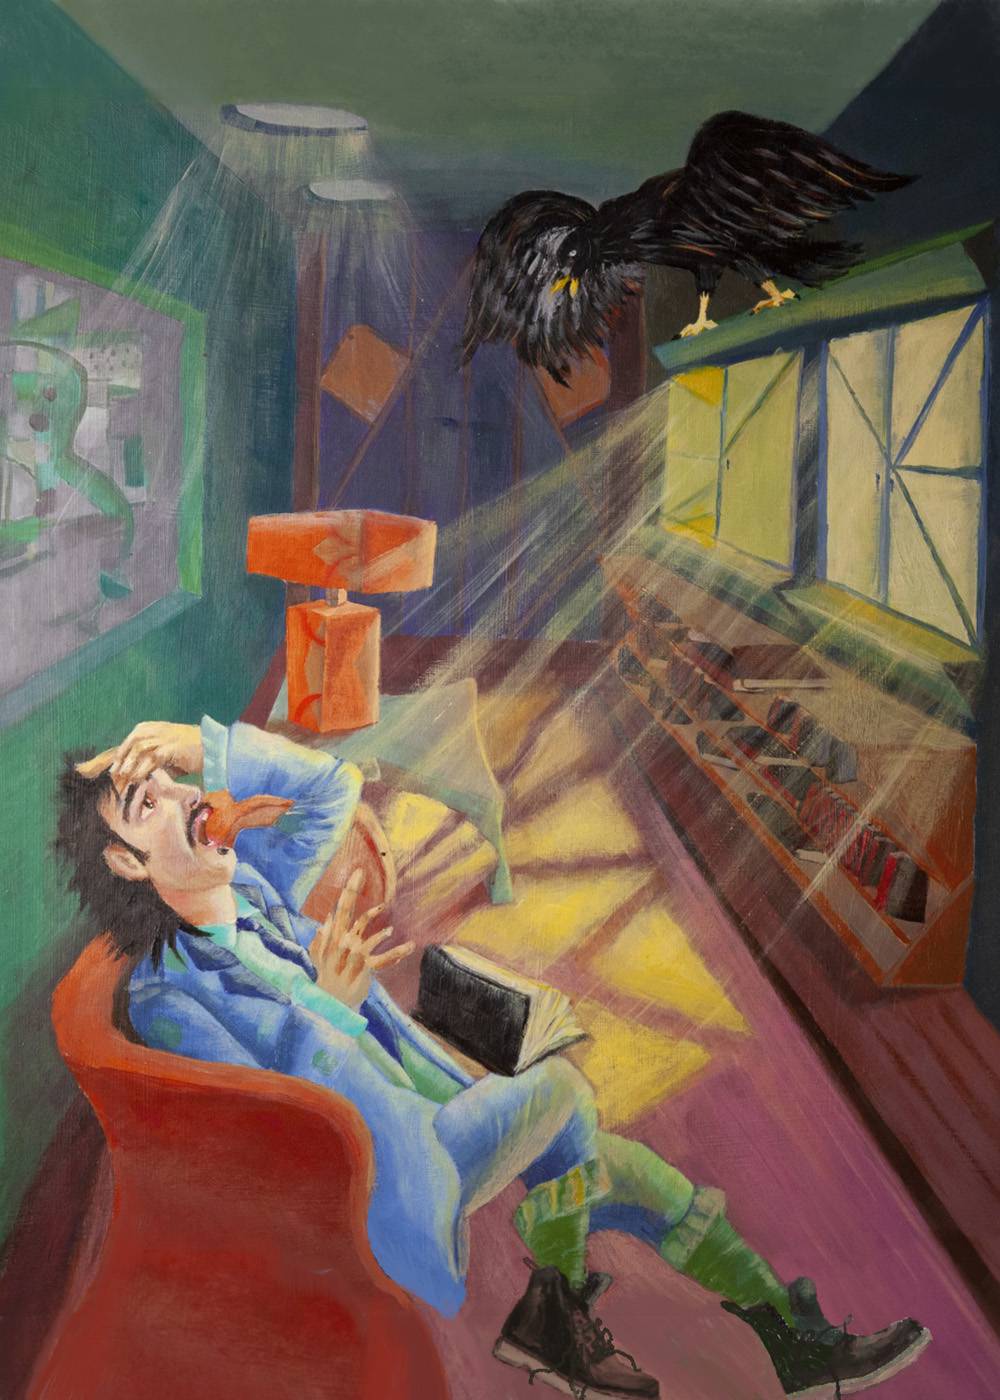 Size 18 x 15.5 in (45.5 x 38 cm)Medium: Acrylic on Canvas board. This image is the scene where the Raven goes inside the character's room to tell him revealing news. At the same time, the light of the sun reflects with strength into the room as is if it was emulating the intensity of the news.  I wanted to create a scene that would hint movement, flow, and the illusion of depth to live him in an exposed and fragile environment. 